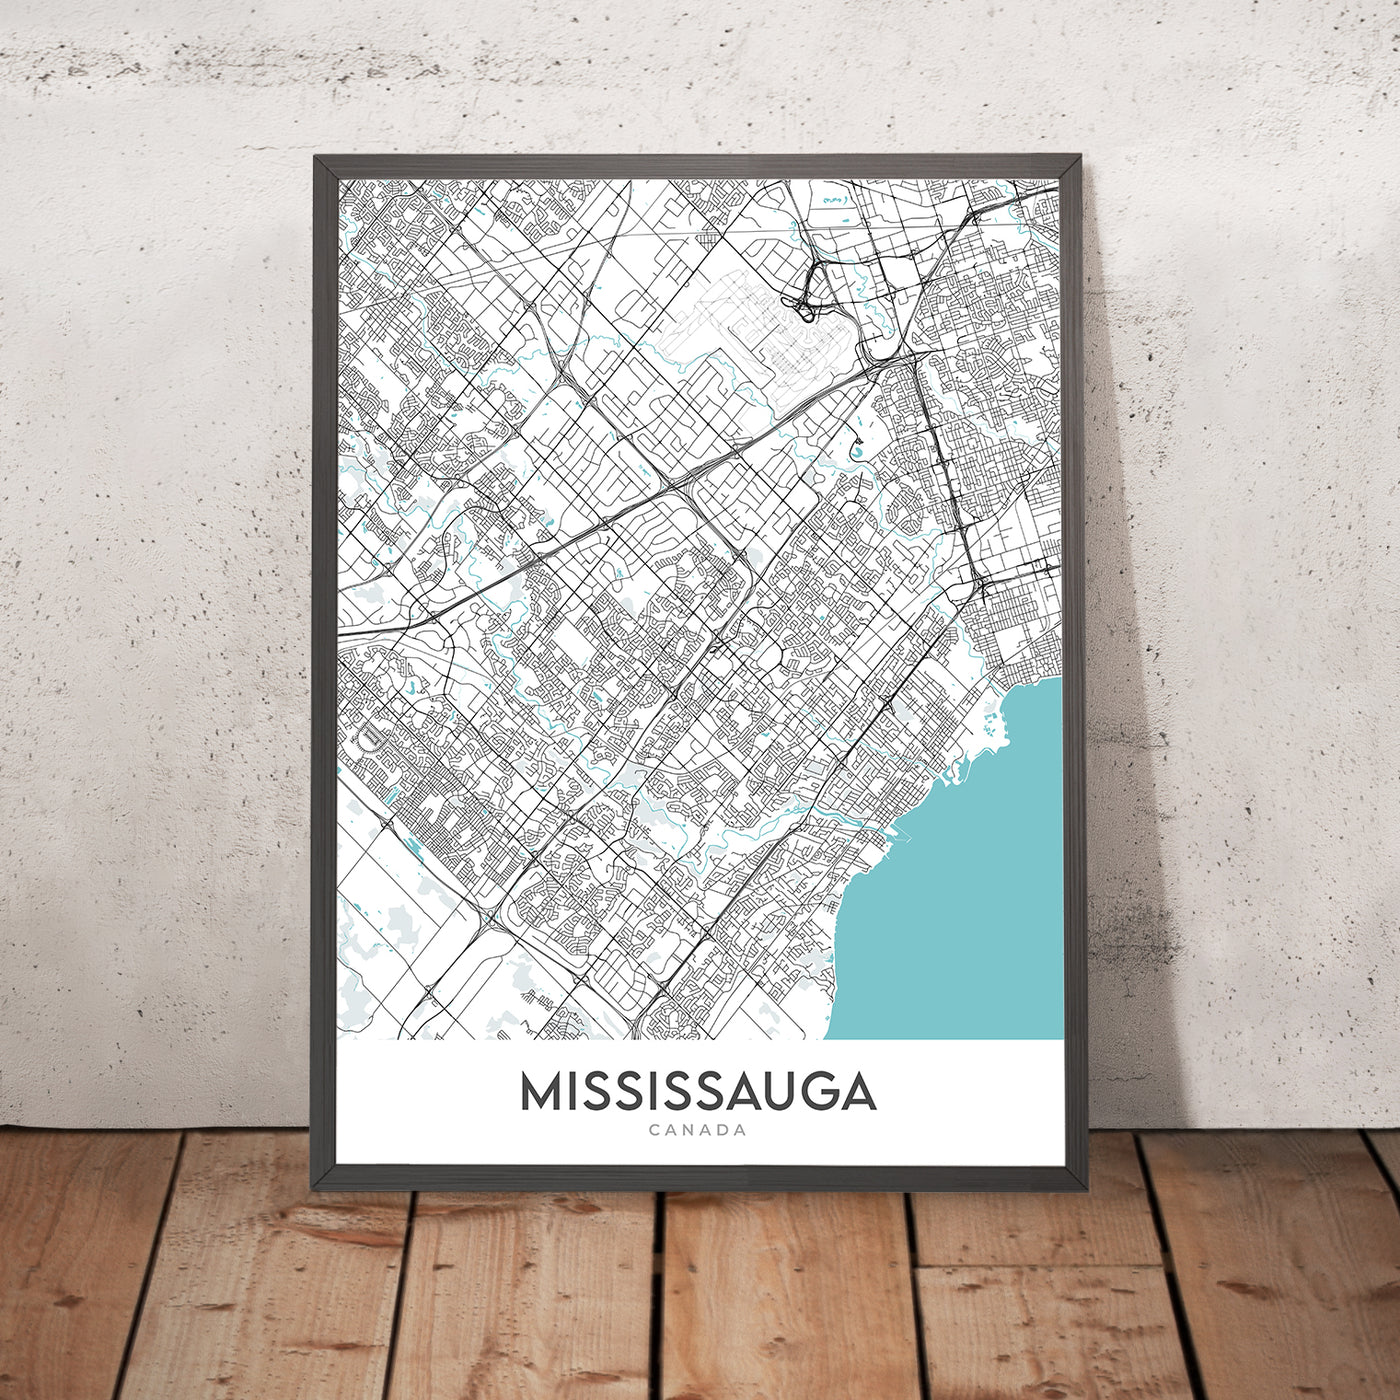 Modern City Map of Mississauga, Canada: City Centre, Streetsville, Port Credit, Art Gallery, Square One